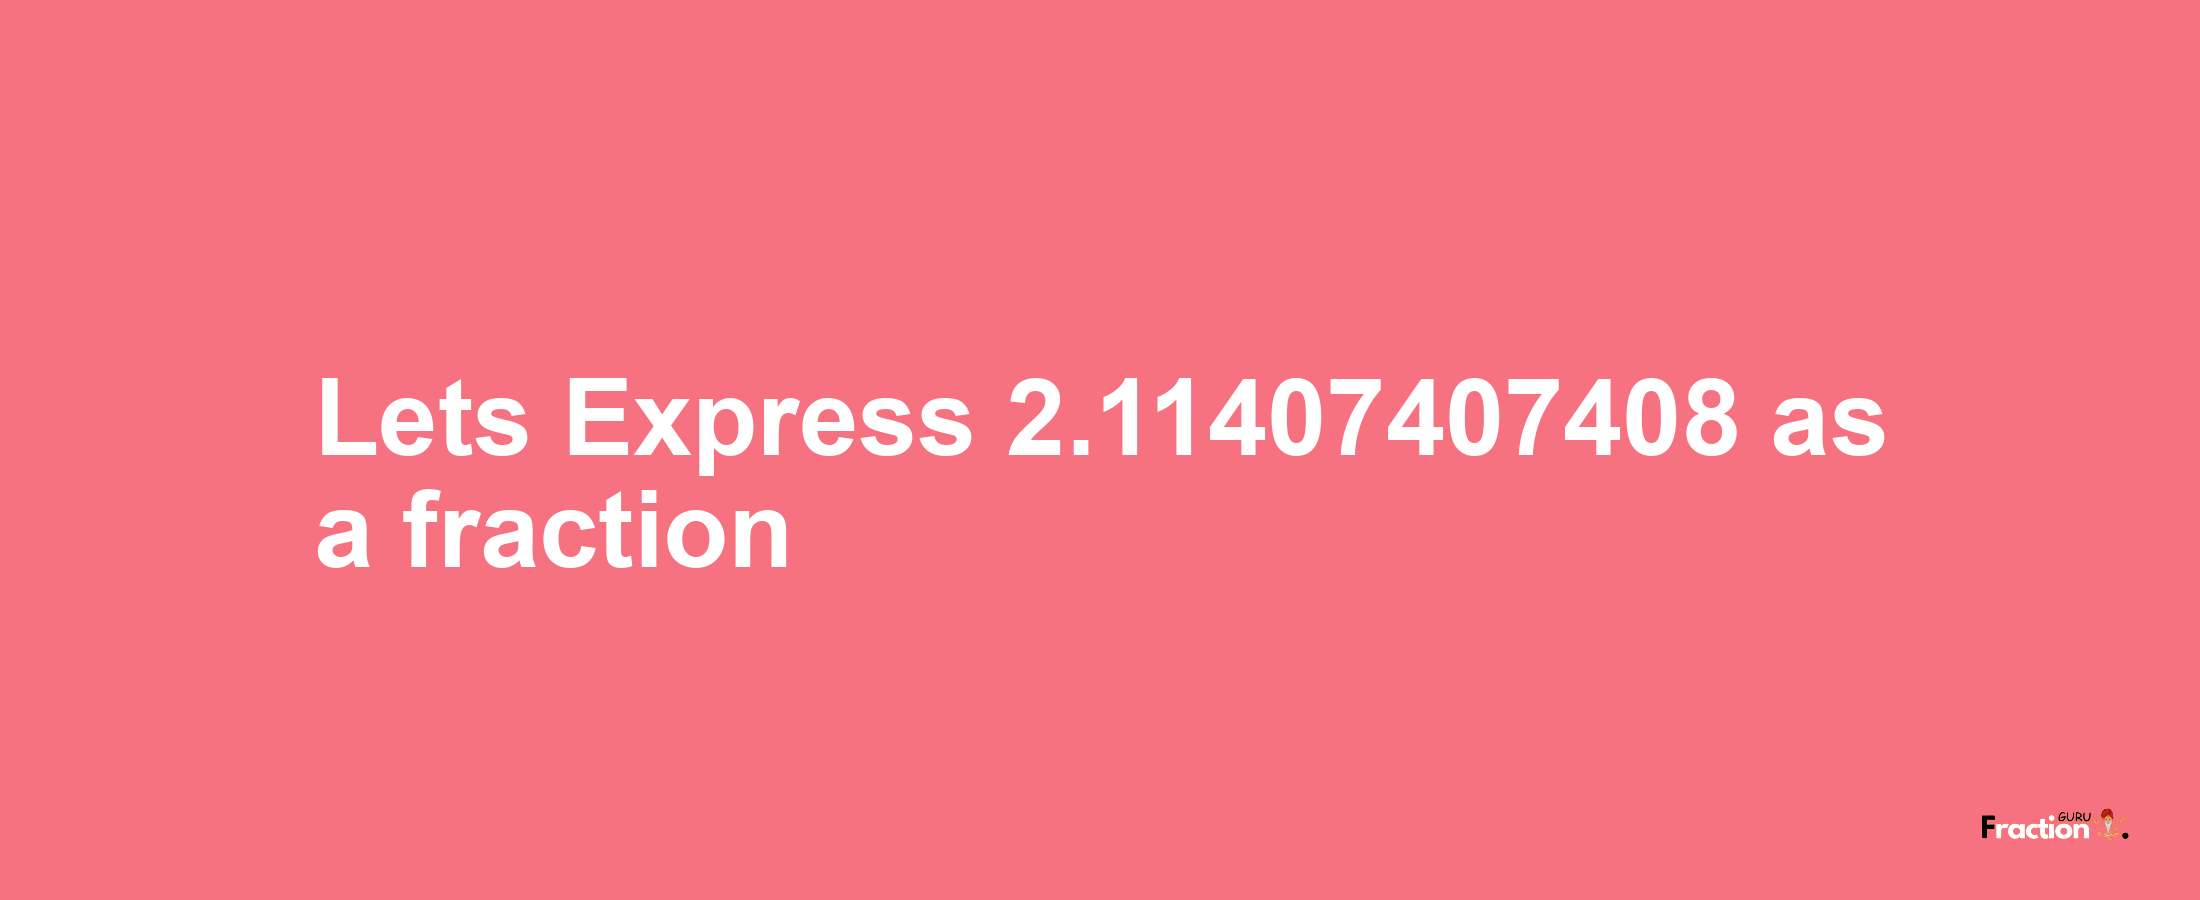 Lets Express 2.11407407408 as afraction